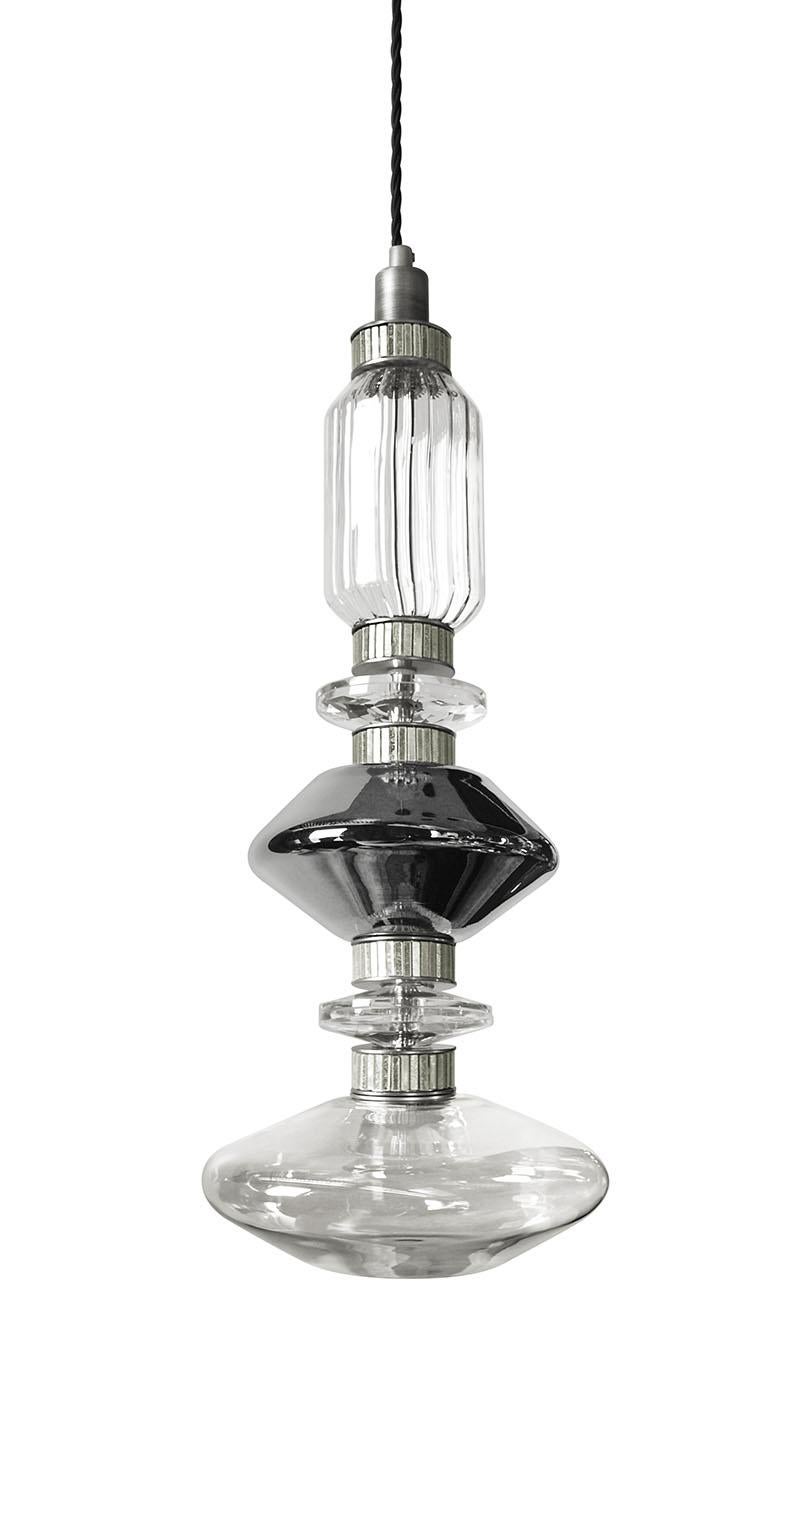 Ceiling Lamp with Pyrex Glass Elements in Amber-Smoked Finish, Bronzed or Chrome In New Condition For Sale In London, GB